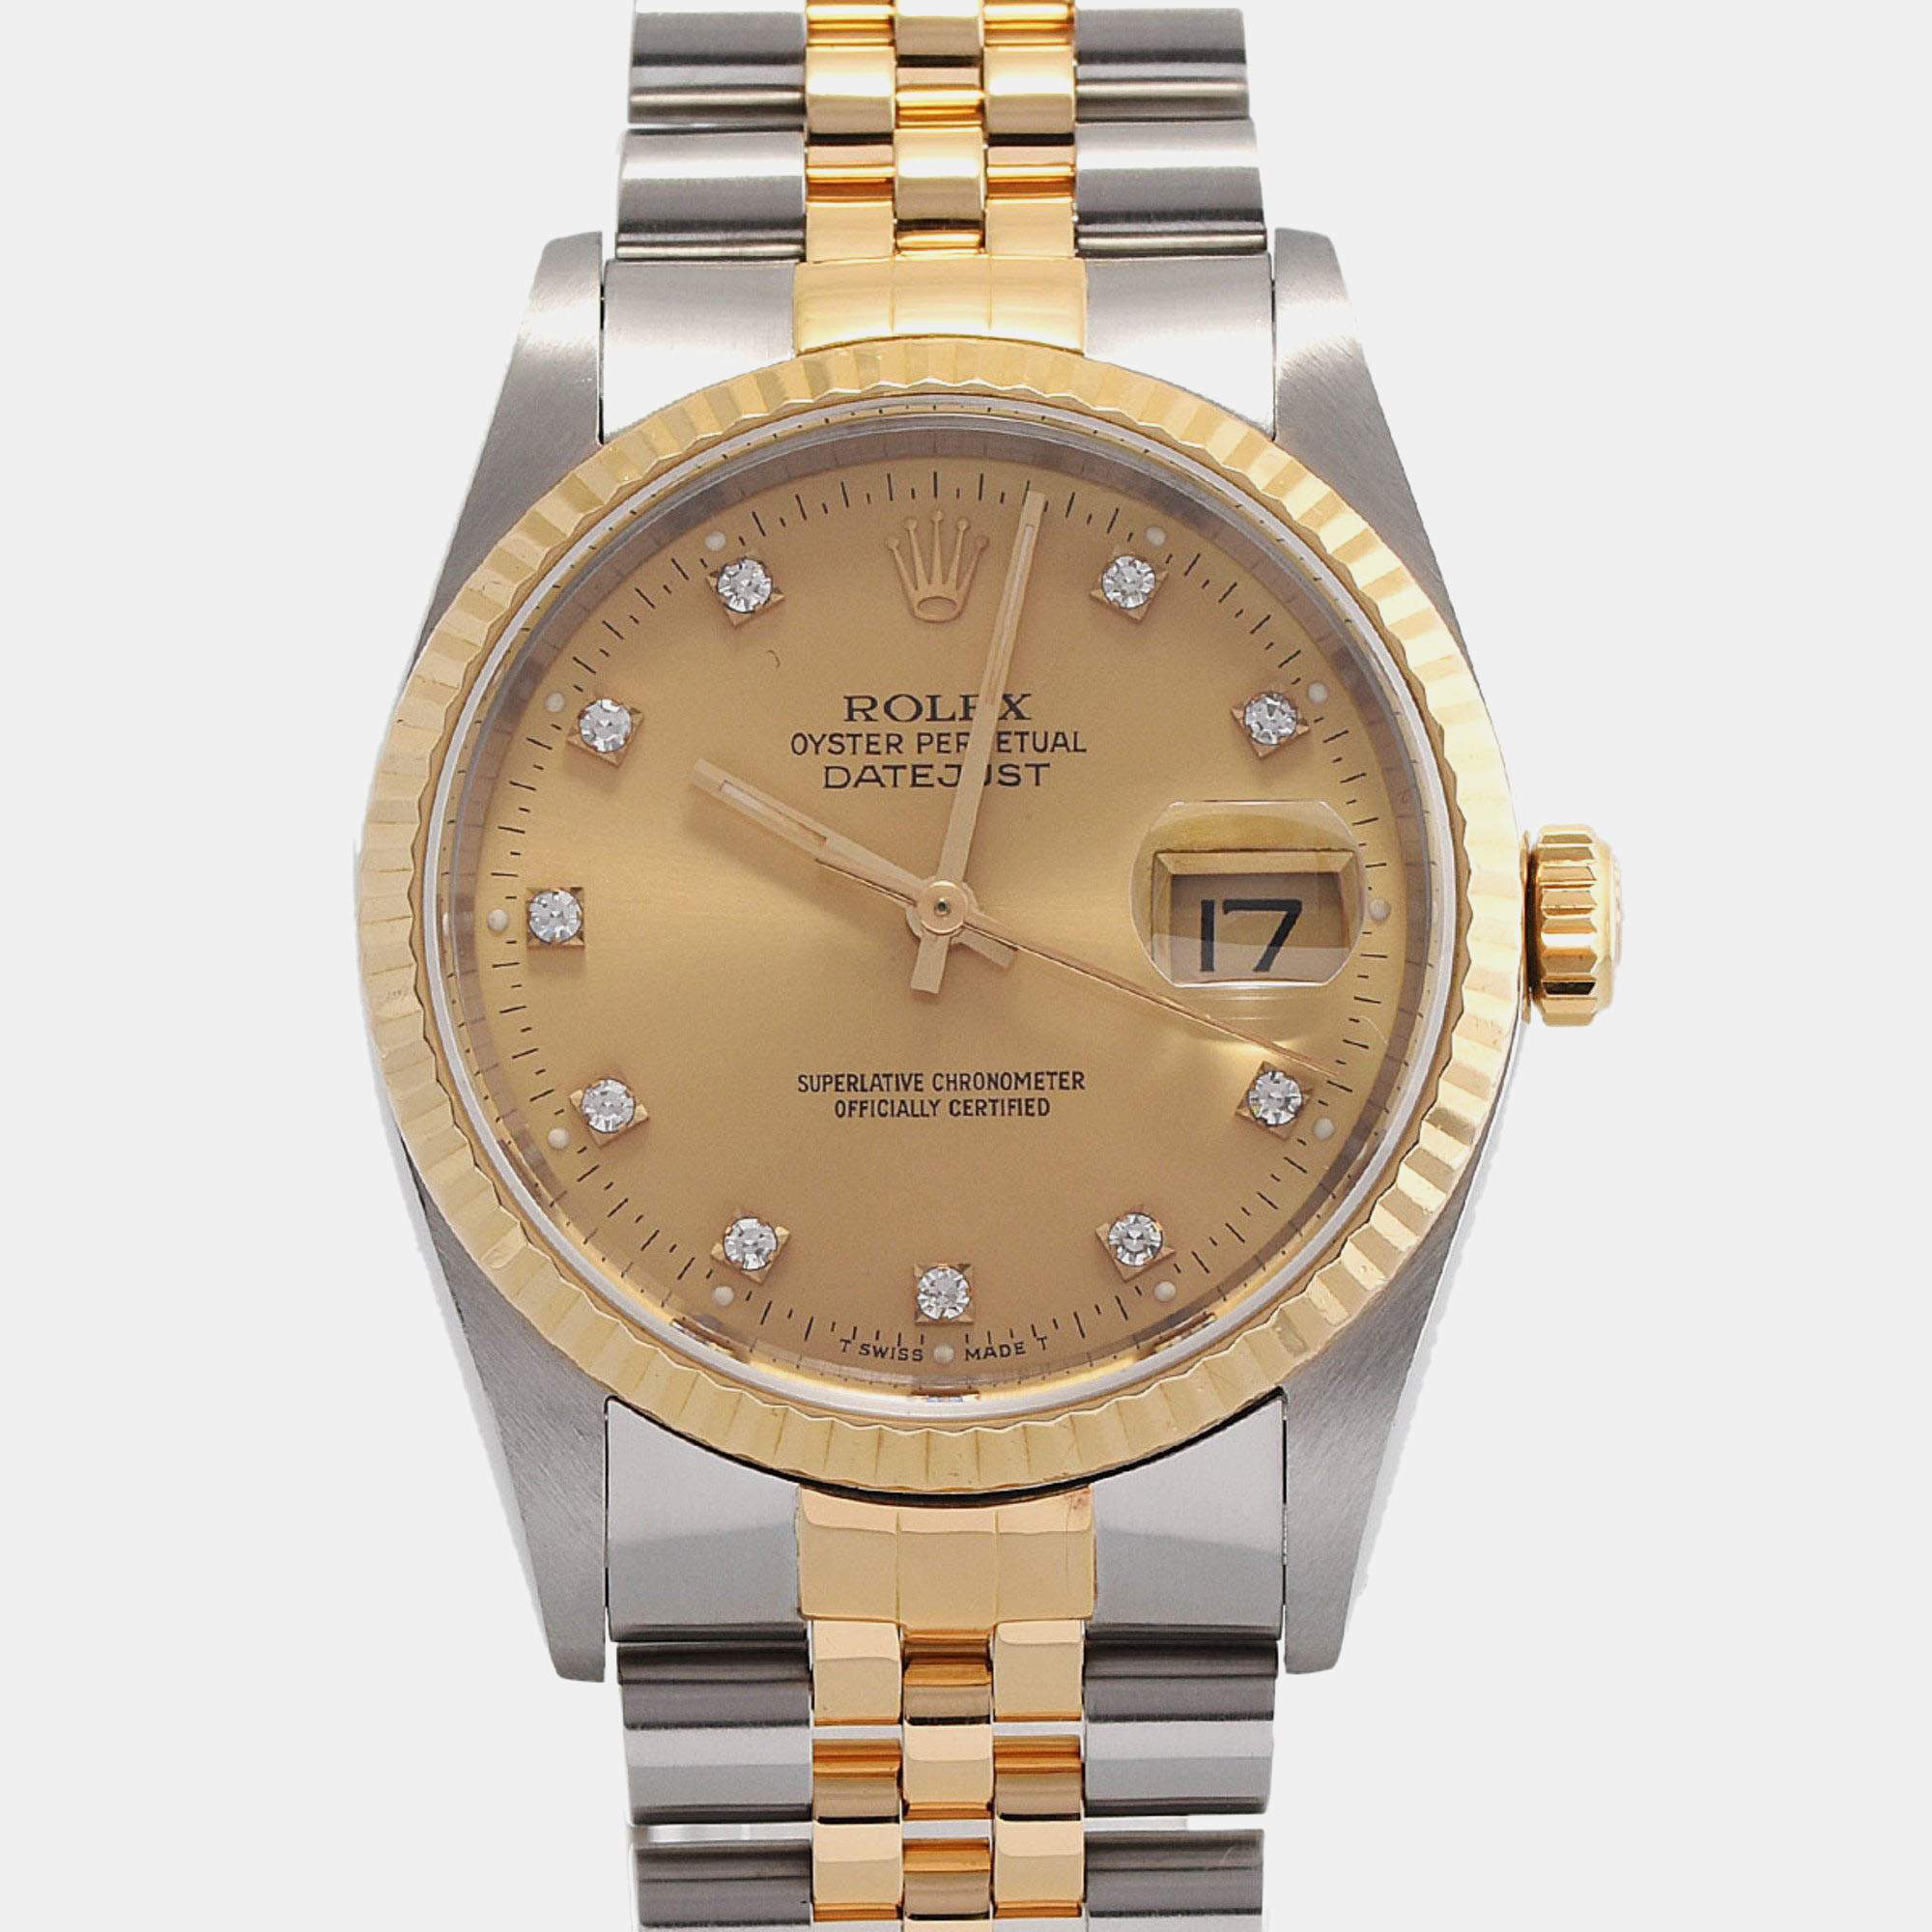 Rolex champagne diamond 18k yellow gold stainless steel datejust automatic men's wristwatch 36 mm